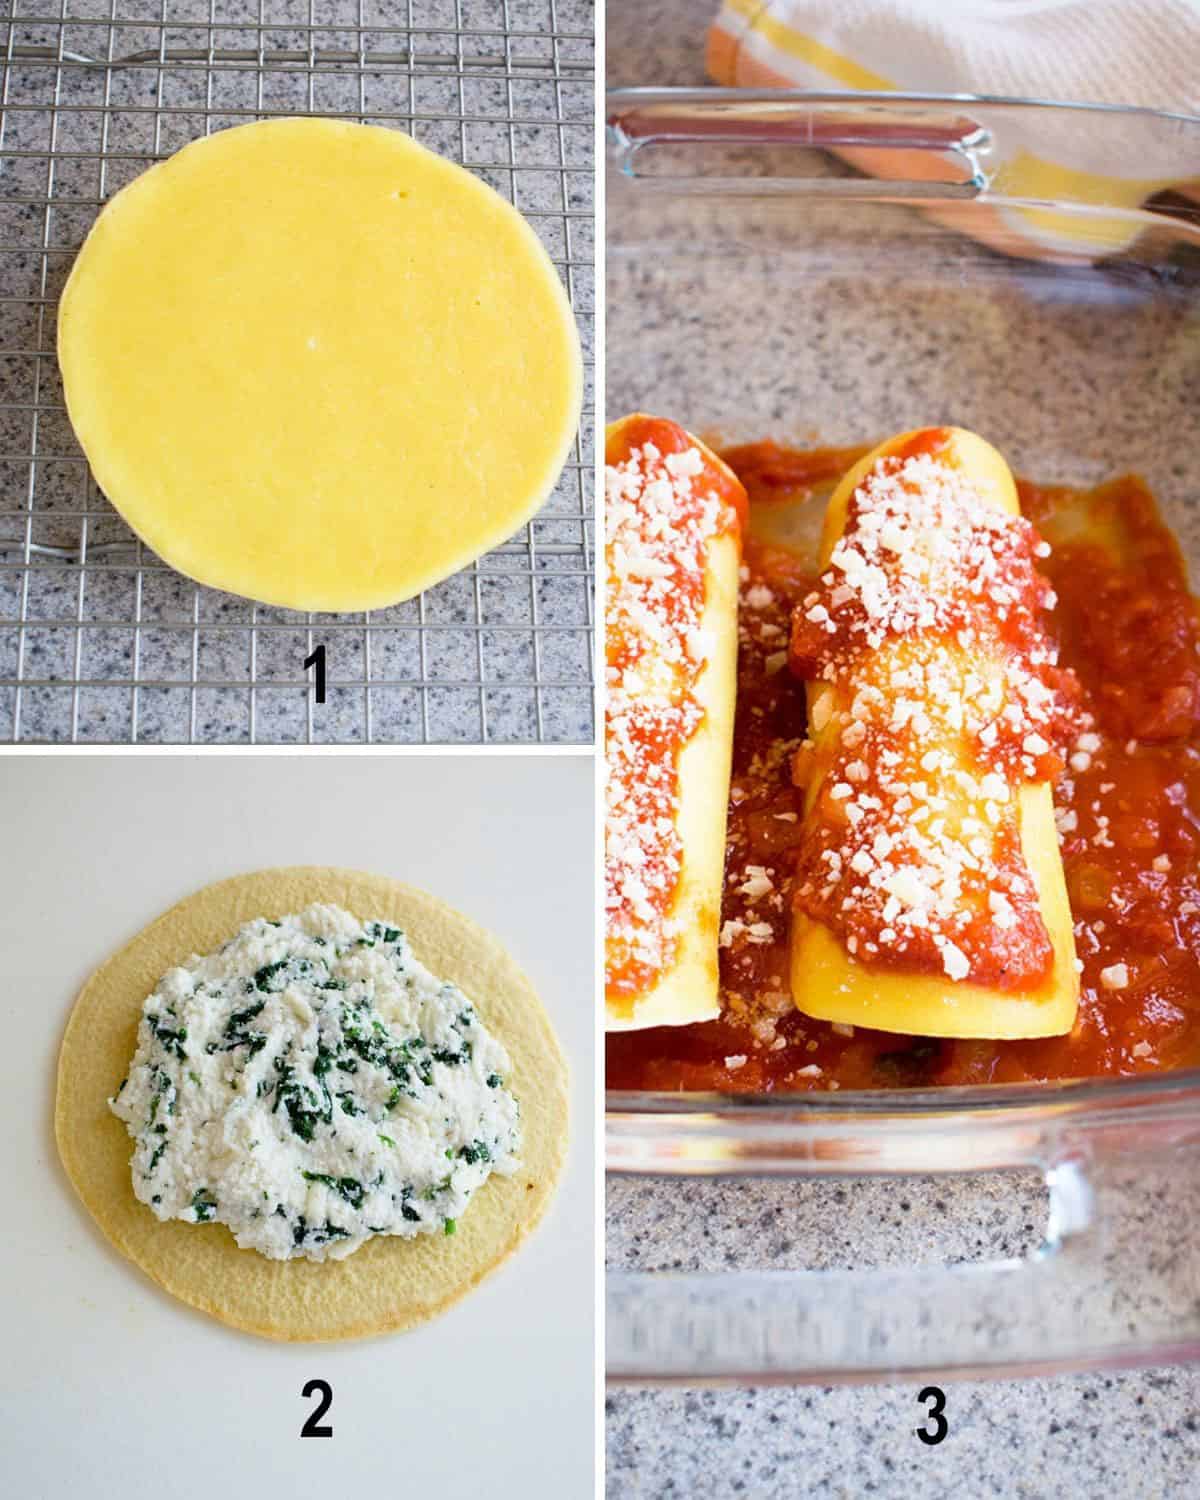 crepe, spinach-ricotta filling on crepe, rolled up manicotti in pan with tomato sauce